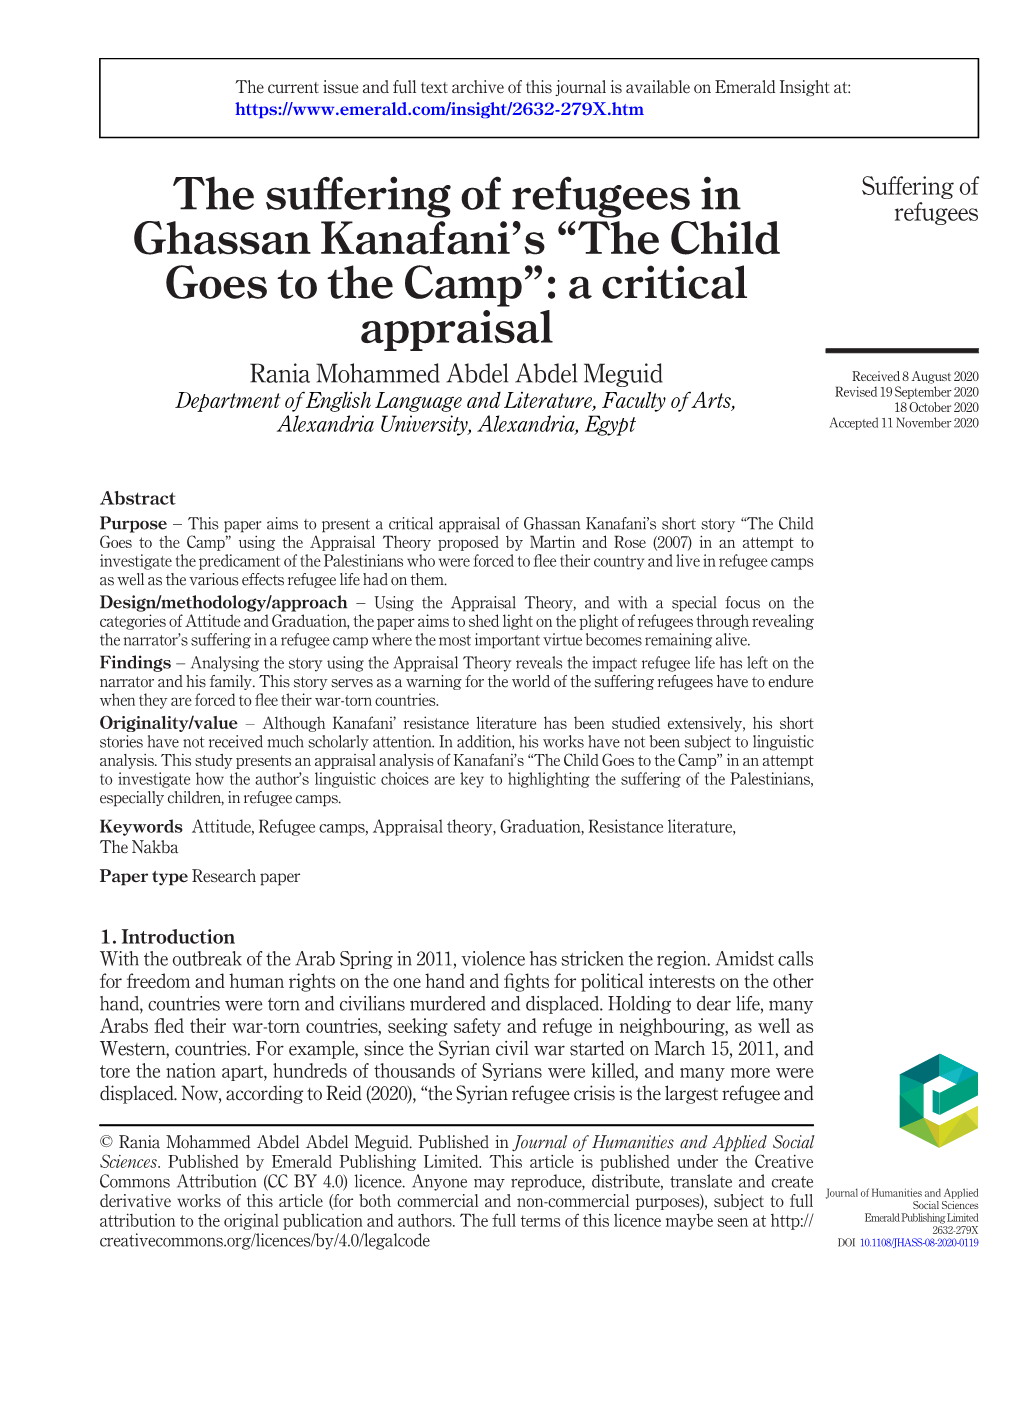 The Suffering of Refugees in Ghassan Kanafani's “The Child Goes to The